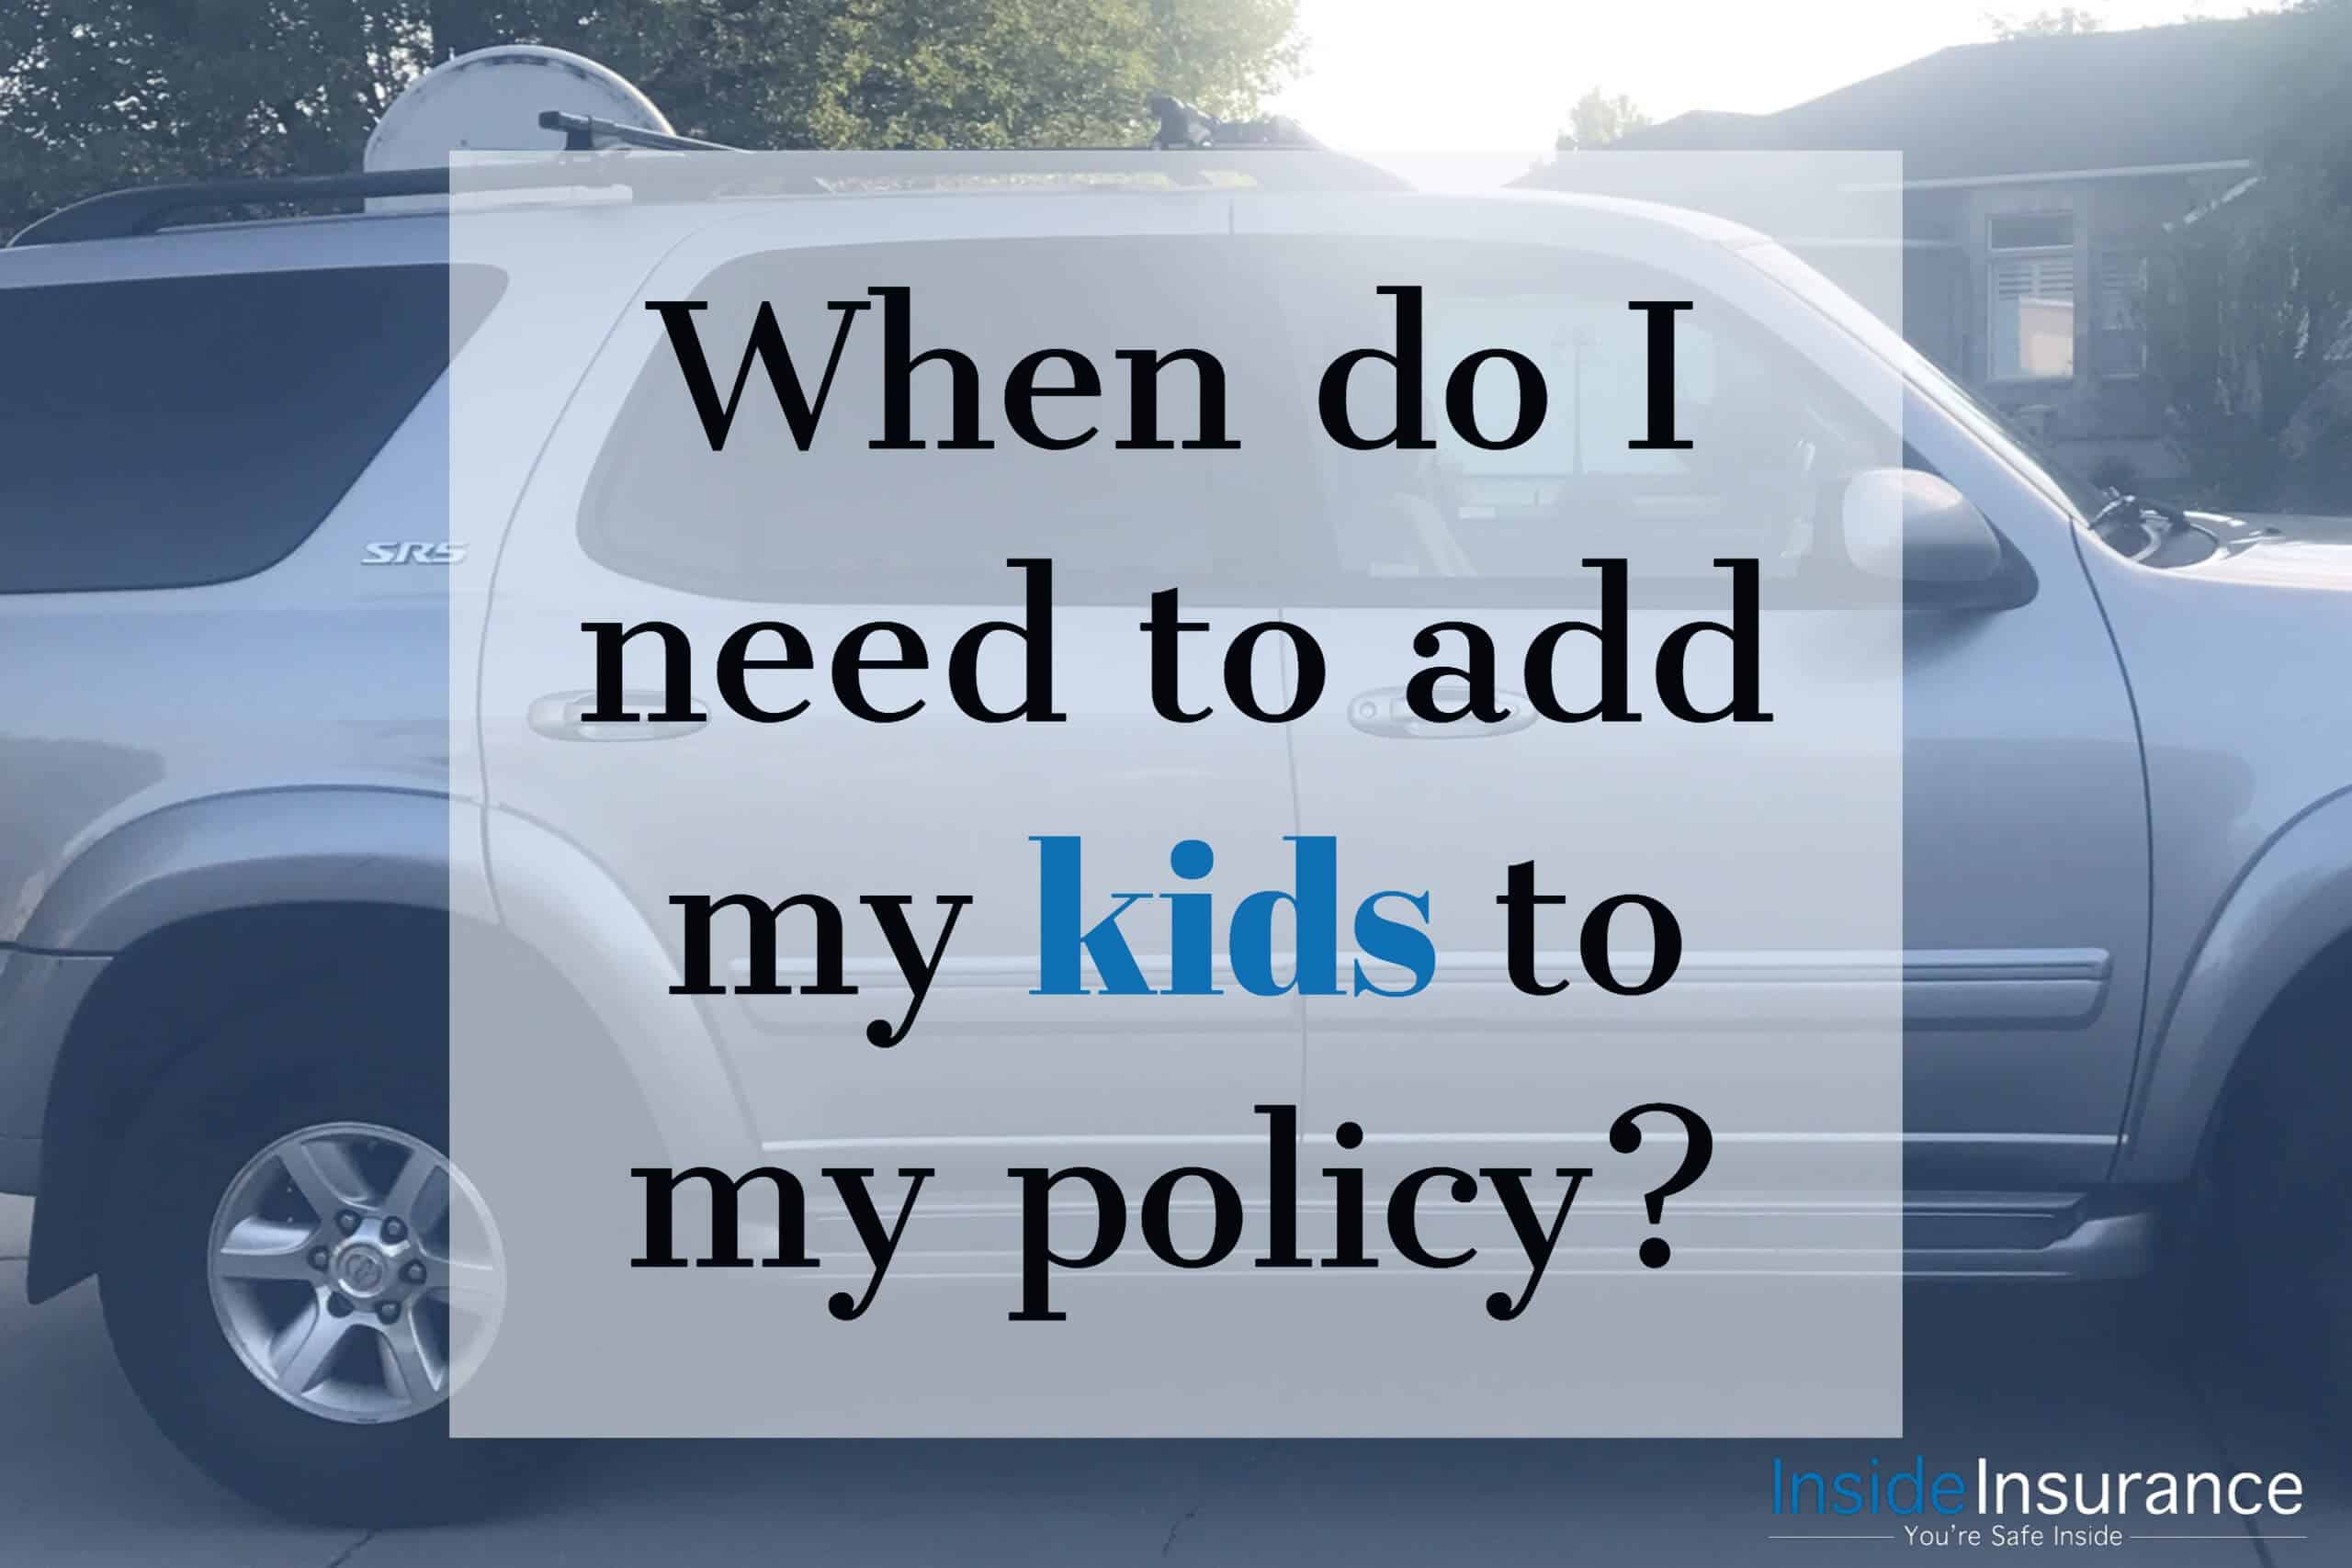 When should I add my kids to my auto insurance policy?